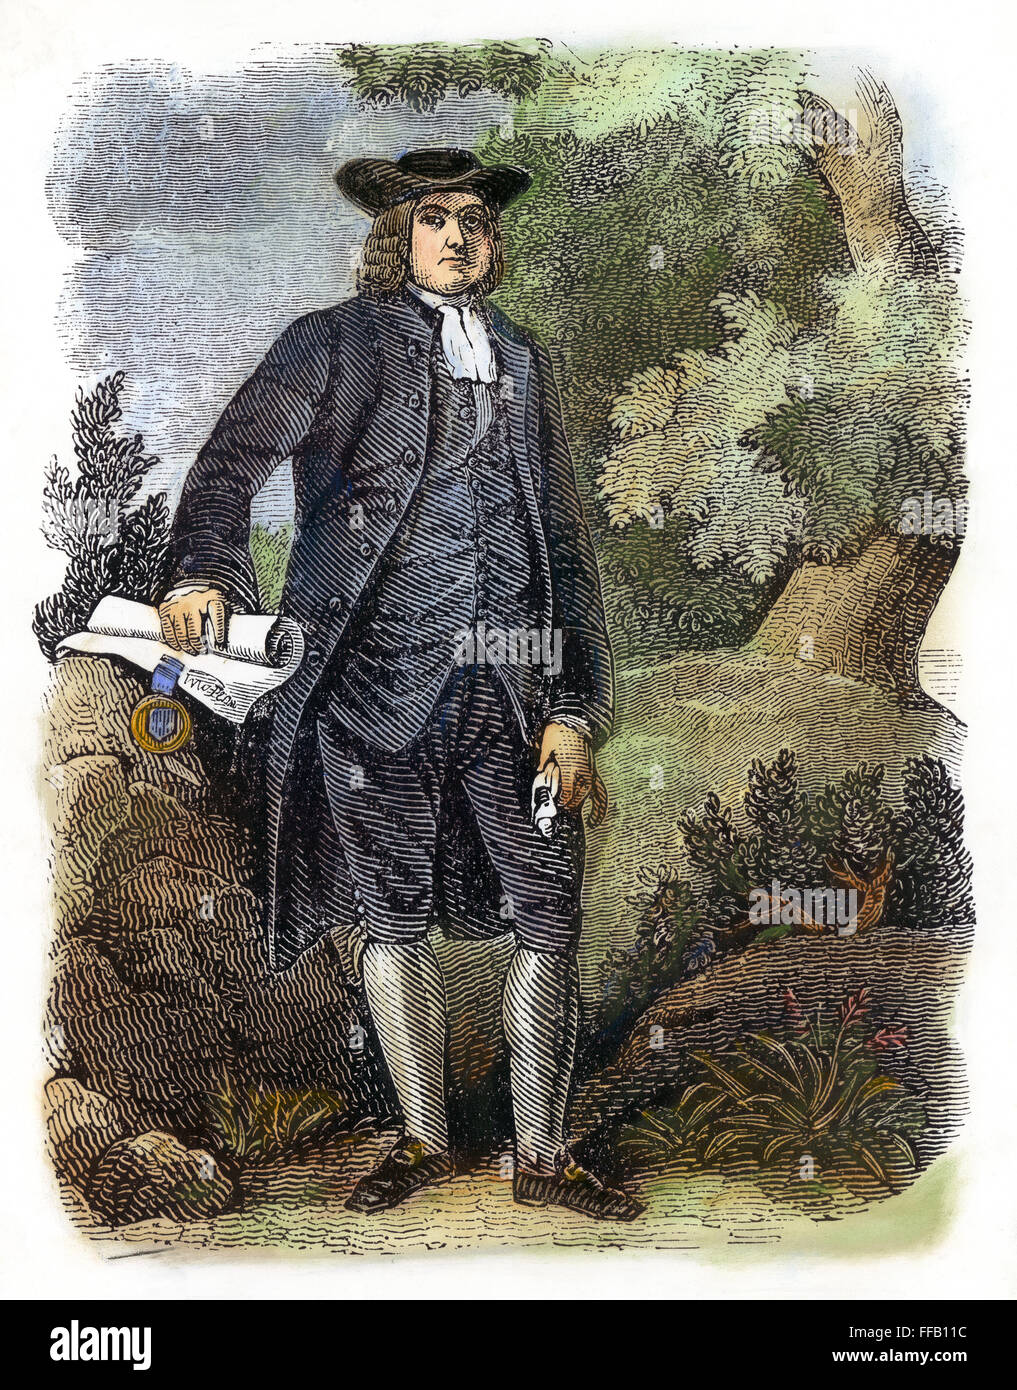 WILLIAM PENN (1644-1718). /nFounder of the colony of Pennsylvania. Wood engraving, early 19th century. Stock Photo